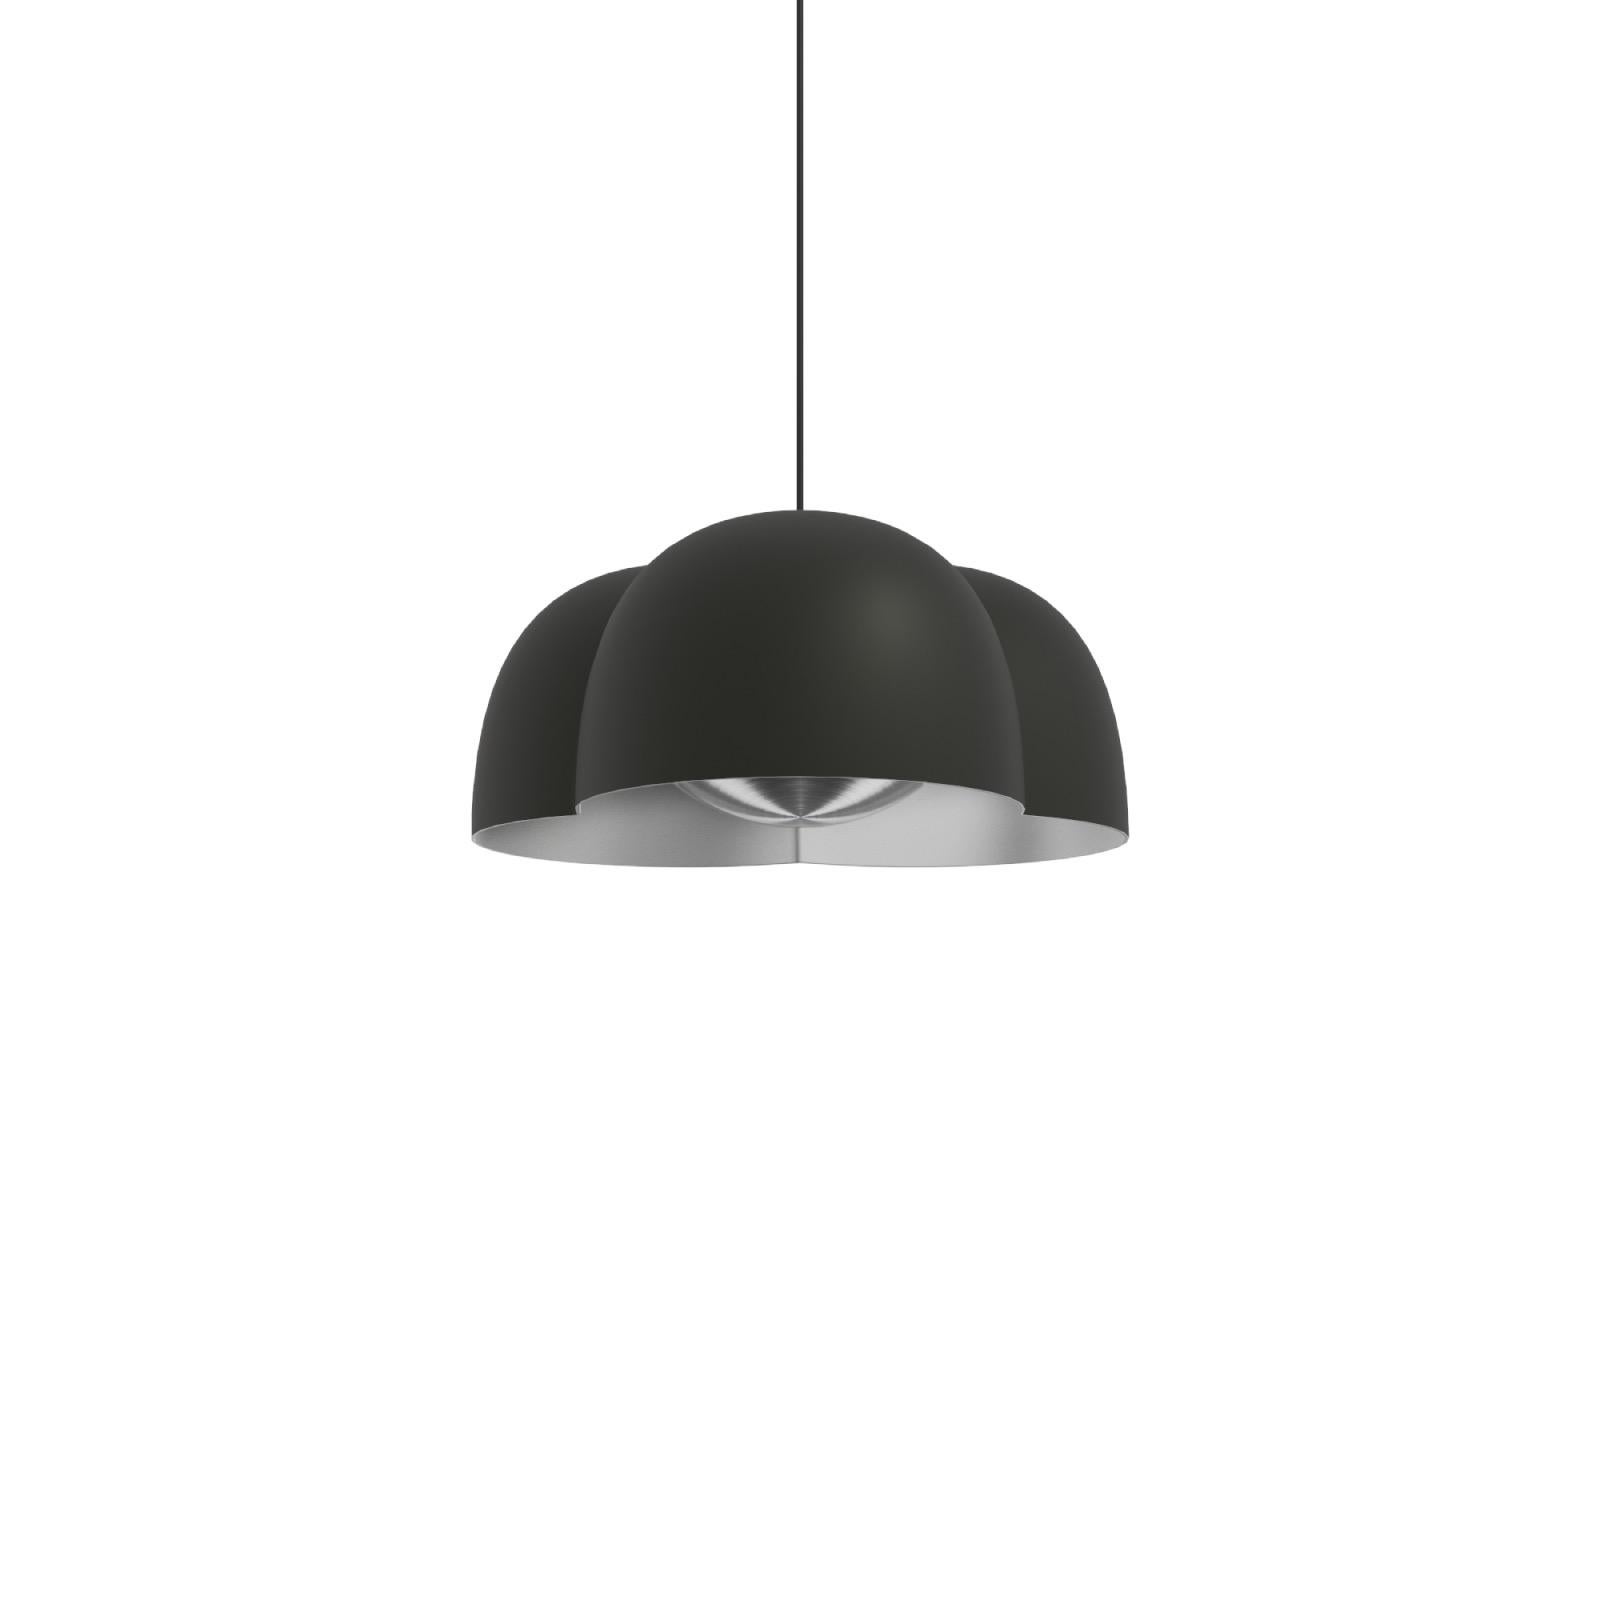 Cotton Pendant lamp by Sebastian Herkner x AGO Lighting
Materials: Aluminium, Stainless
Light Source: Integrated LED (SMD), DC
Watt. 12W
Color temp. 2700 / 3000K
Cable Length: 3M
Available colors:
Charcoal, chocolate, deep green
Dimensions:
D.